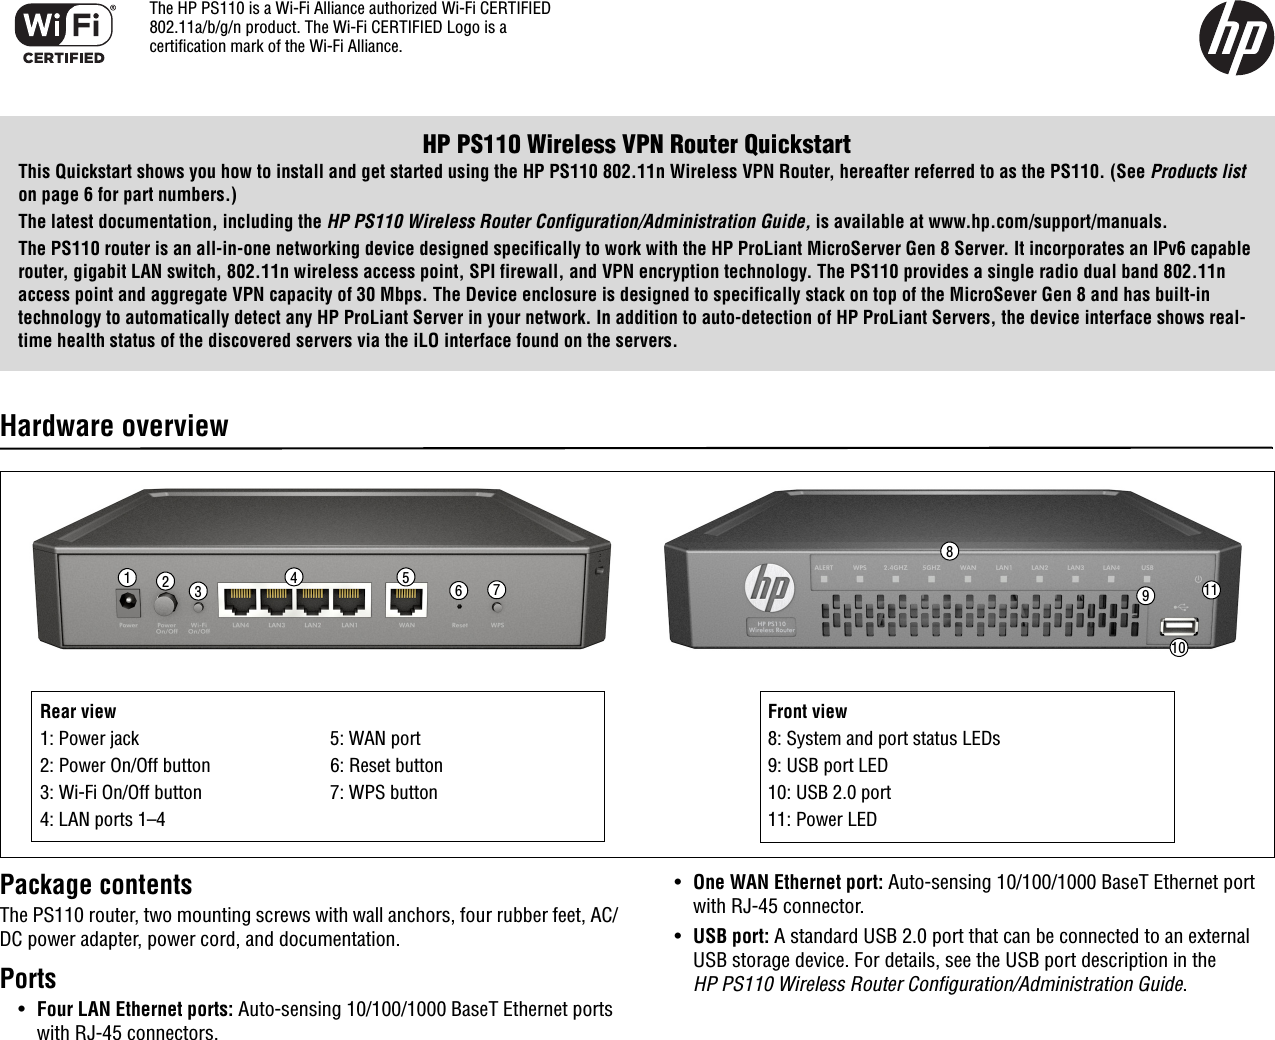 HP PS110 Wireless VPN Router QuickstartThis Quickstart shows you how to install and get started using the HP PS110 802.11n Wireless VPN Router, hereafter referred to as the PS110. (See Products list on page 6 for part numbers.)The latest documentation, including the HP PS110 Wireless Router Configuration/Administration Guide, is available at www.hp.com/support/manuals.The PS110 router is an all-in-one networking device designed specifically to work with the HP ProLiant MicroServer Gen 8 Server. It incorporates an IPv6 capable router, gigabit LAN switch, 802.11n wireless access point, SPI firewall, and VPN encryption technology. The PS110 provides a single radio dual band 802.11n access point and aggregate VPN capacity of 30 Mbps. The Device enclosure is designed to specifically stack on top of the MicroSever Gen 8 and has built-in technology to automatically detect any HP ProLiant Server in your network. In addition to auto-detection of HP ProLiant Servers, the device interface shows real-time health status of the discovered servers via the iLO interface found on the servers.Hardware overviewPackage contentsThe PS110 router, two mounting screws with wall anchors, four rubber feet, AC/DC power adapter, power cord, and documentation.Ports•Four LAN Ethernet ports: Auto-sensing 10/100/1000 BaseT Ethernet ports with RJ-45 connectors. •One WAN Ethernet port: Auto-sensing 10/100/1000 BaseT Ethernet port with RJ-45 connector. •USB port: A standard USB 2.0 port that can be connected to an external USB storage device. For details, see the USB port description in the HP PS110 Wireless Router Configuration/Administration Guide.8124 5 67910311Rear view1: Power jack 5: WAN port2: Power On/Off button 6: Reset button3: Wi-Fi On/Off button 7: WPS button4: LAN ports 1–4Front view8: System and port status LEDs9: USB port LED10: USB 2.0 port11: Power LEDThe HP PS110 is a Wi-Fi Alliance authorized Wi-Fi CERTIFIED 802.11a/b/g/n product. The Wi-Fi CERTIFIED Logo is a certification mark of the Wi-Fi Alliance.